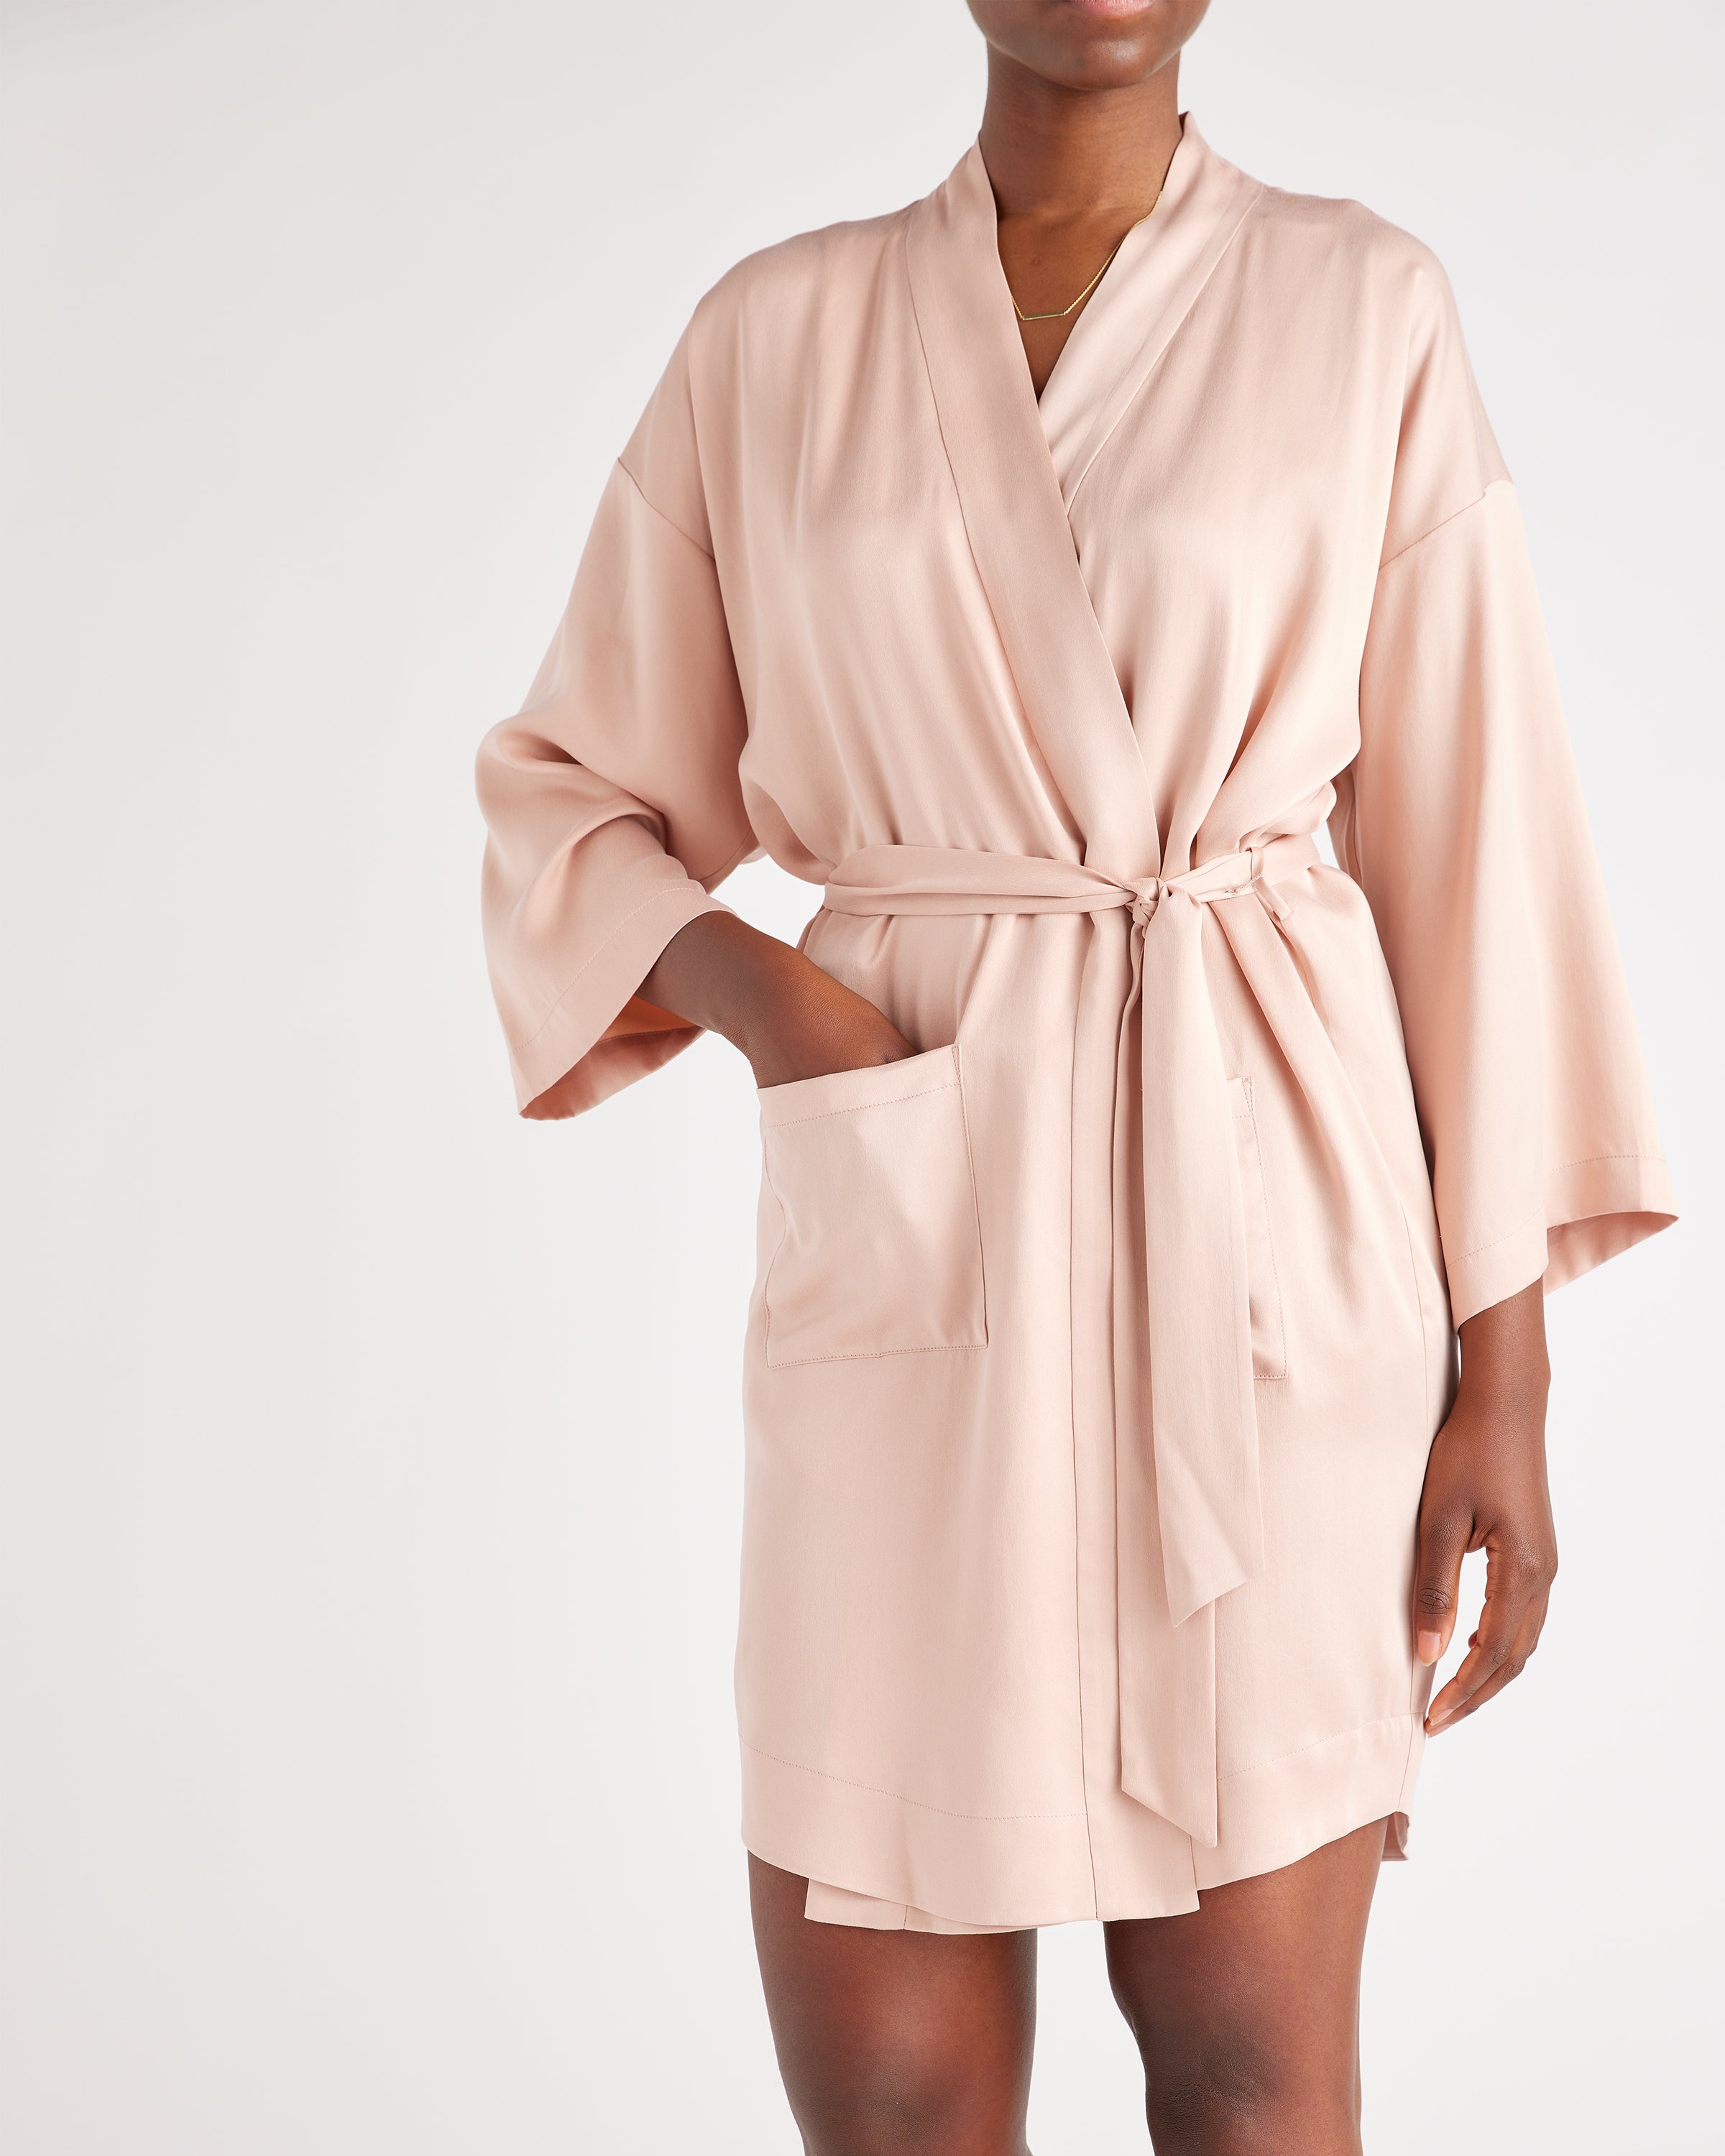 Quince's Washable Silk Collection Is Affordable Luxury